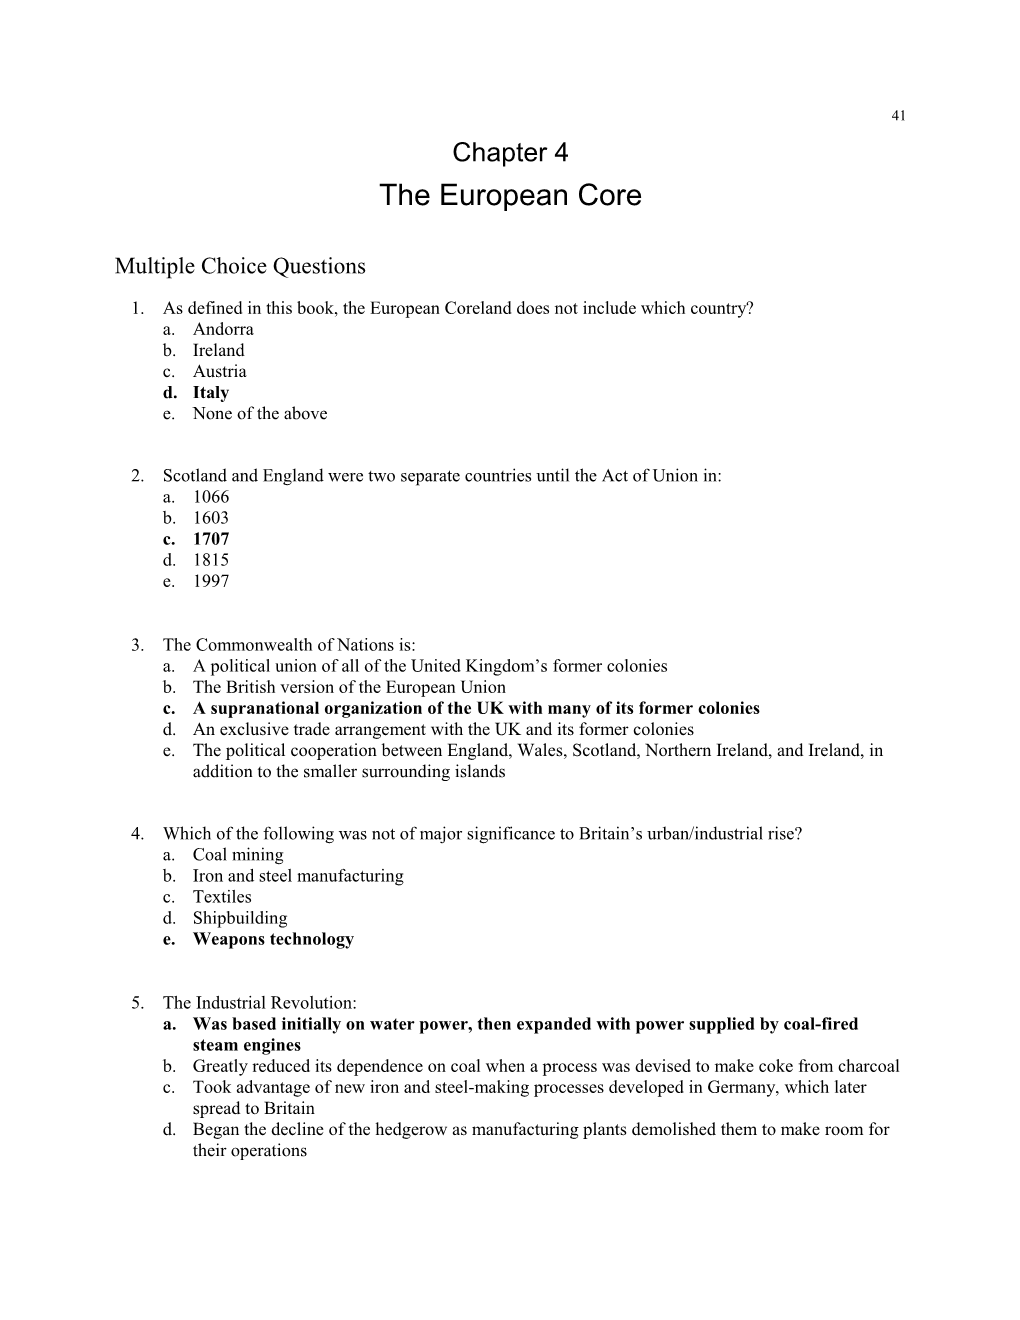 CHAPTER 4 the European Core